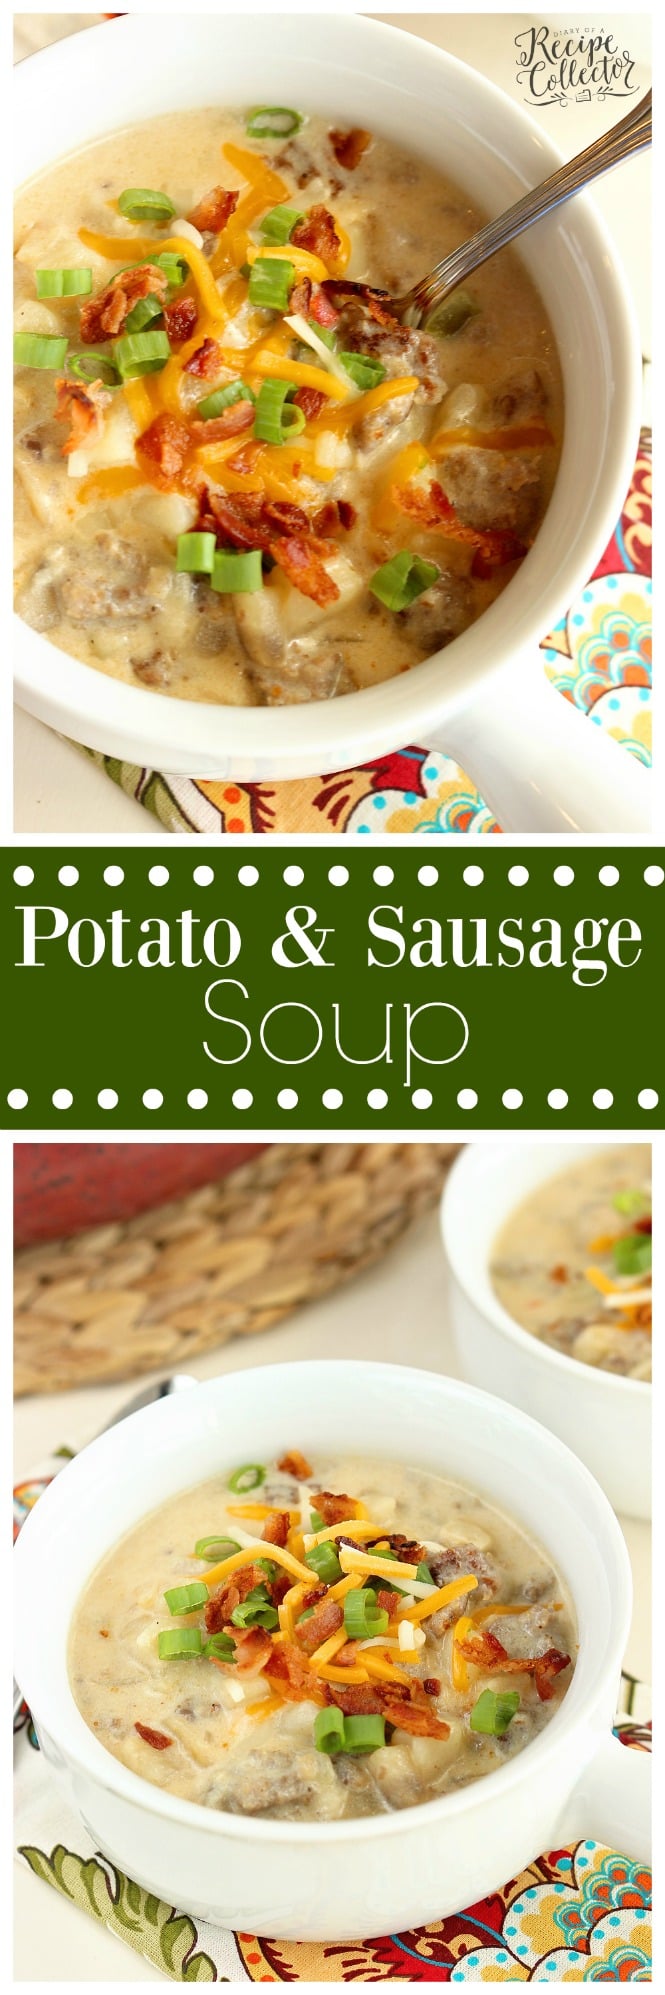 Potato & Sausage Soup - A hearty soup filled with breakfast sausage and frozen hash brown potatoes making it a quick and easy soup recipe idea!